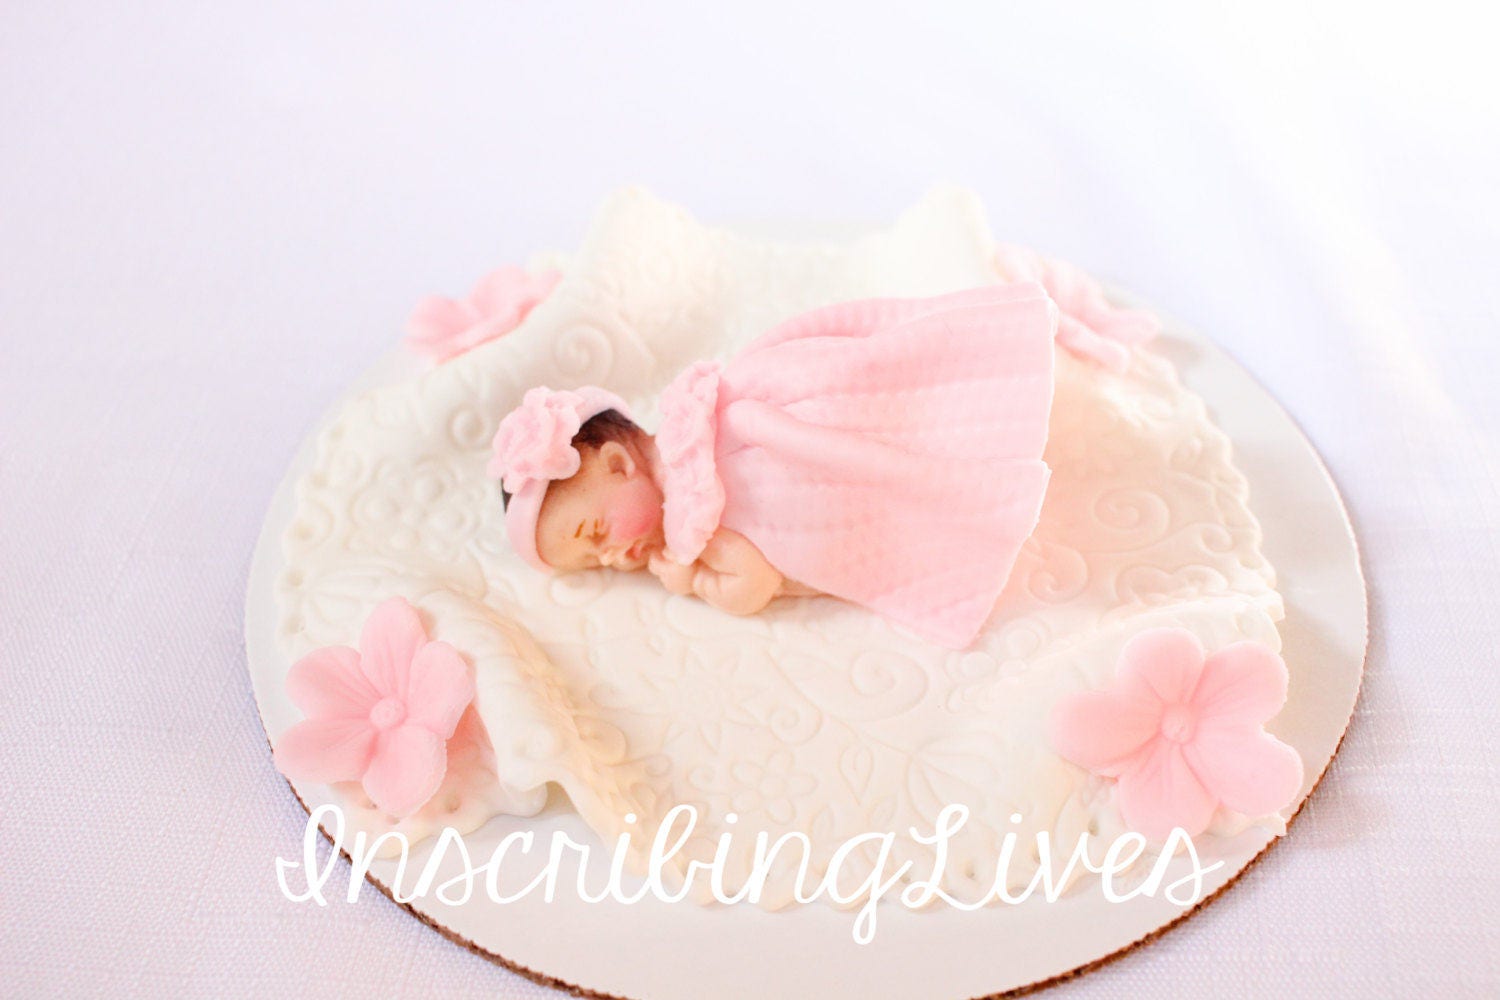 BABY GIRL SUIT Baby shower Image Edible cake topper decoration 